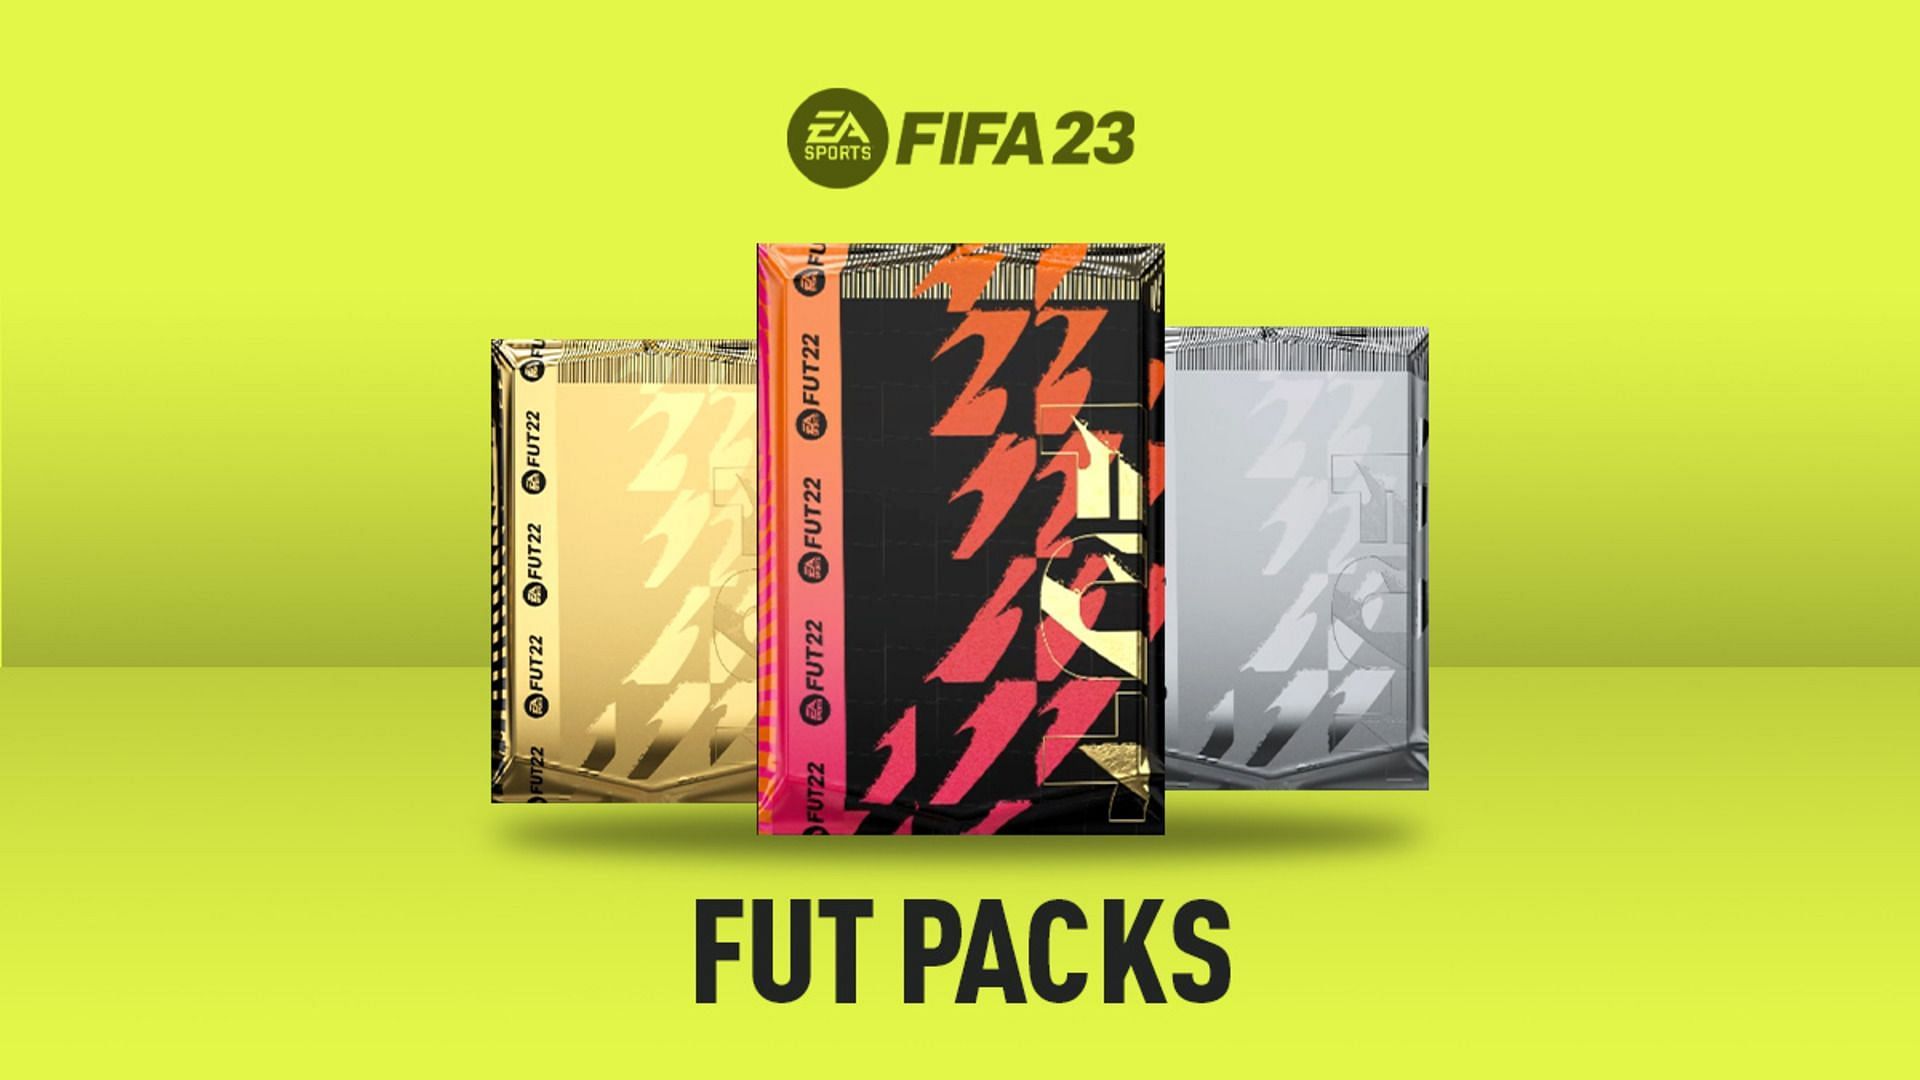 The FIFA 23 store packs update every day at 6:00 pm GMT (Image via fifplay)